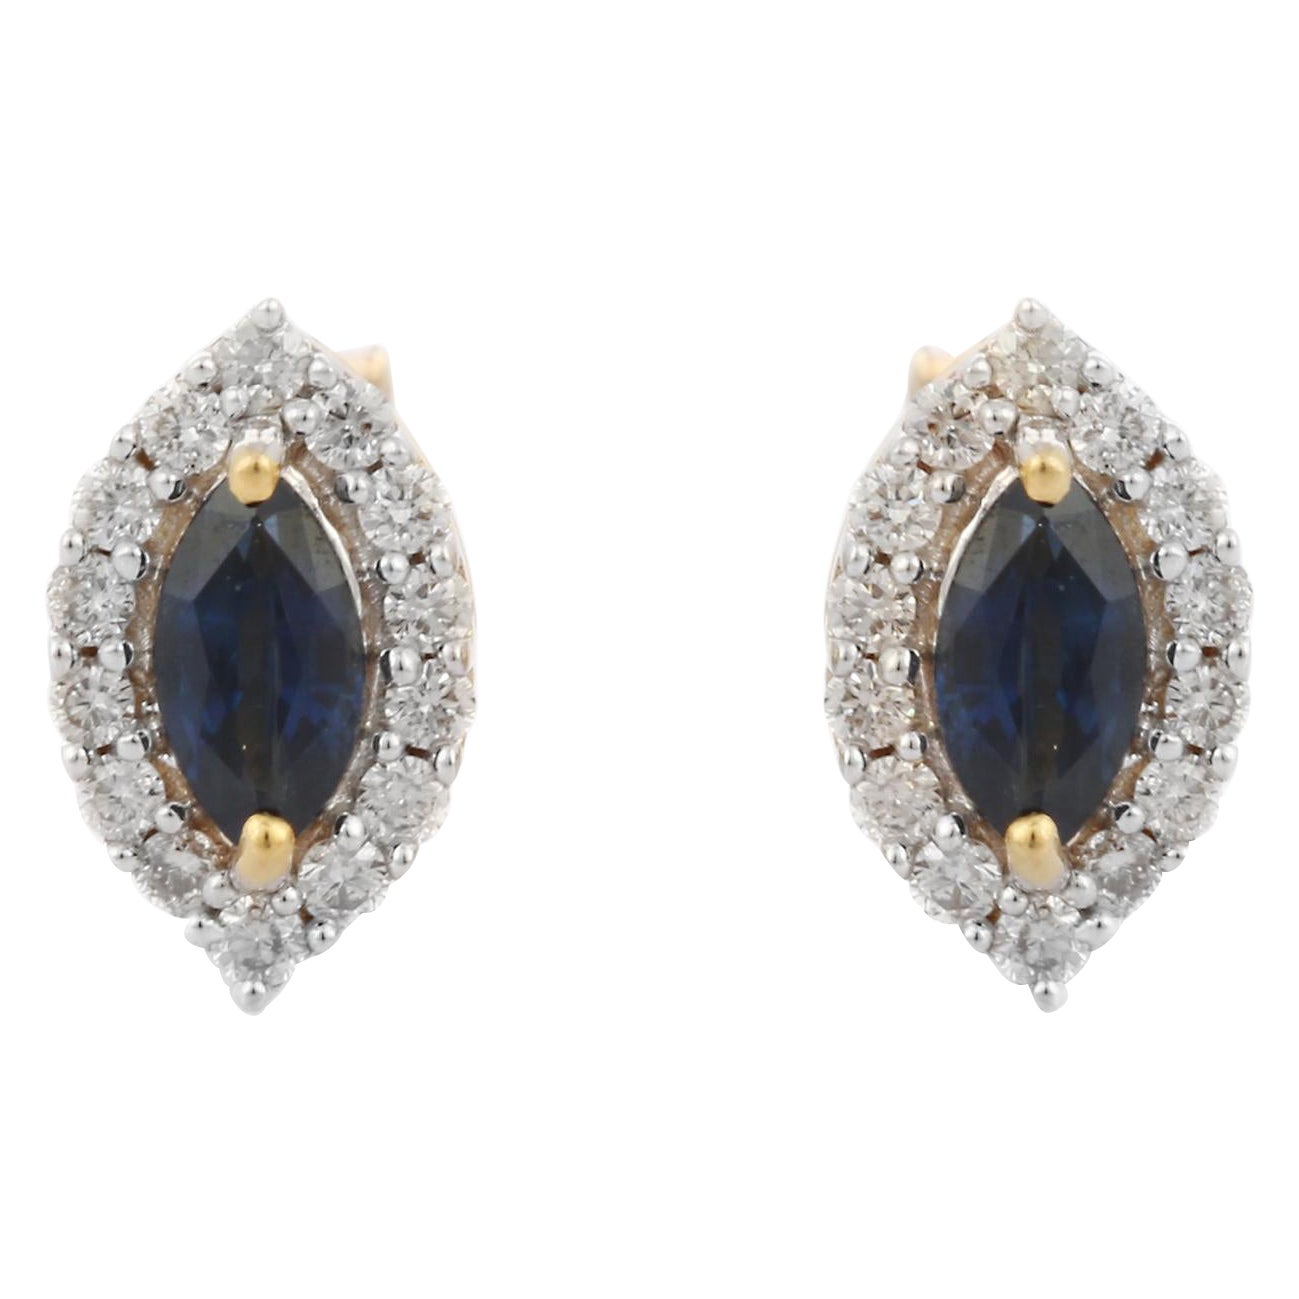 Blue Sapphire and Diamond Halo Stud Earrings in 18K Yellow Gold 